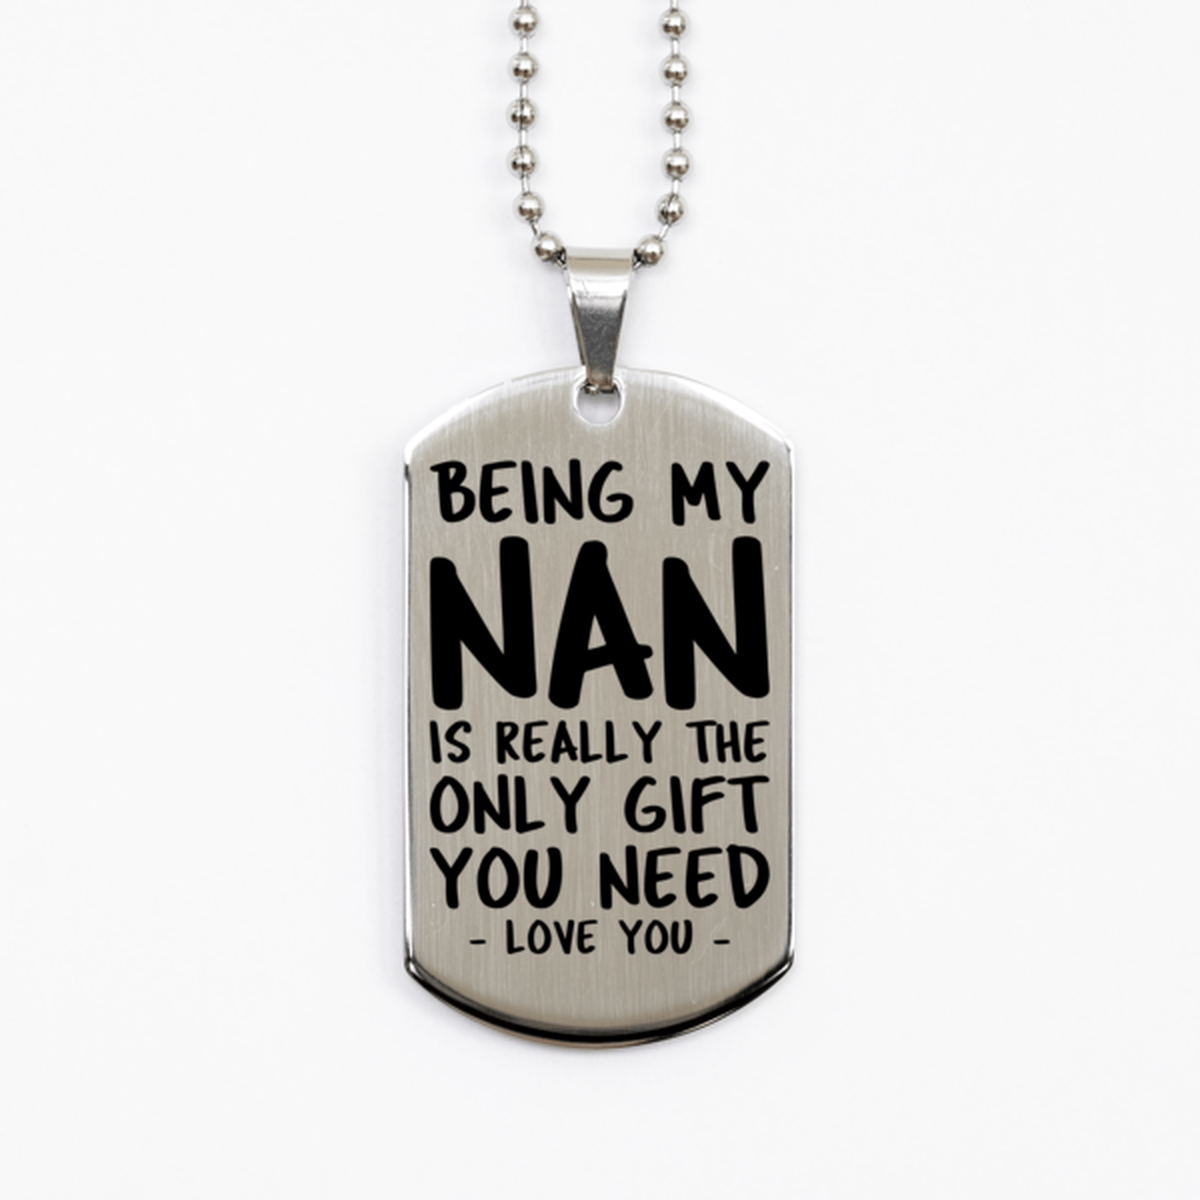 Funny Nan Silver Dog Tag Necklace, Being My Nan Is Really the Only Gift You Need, Best Birthday Gifts for Nan